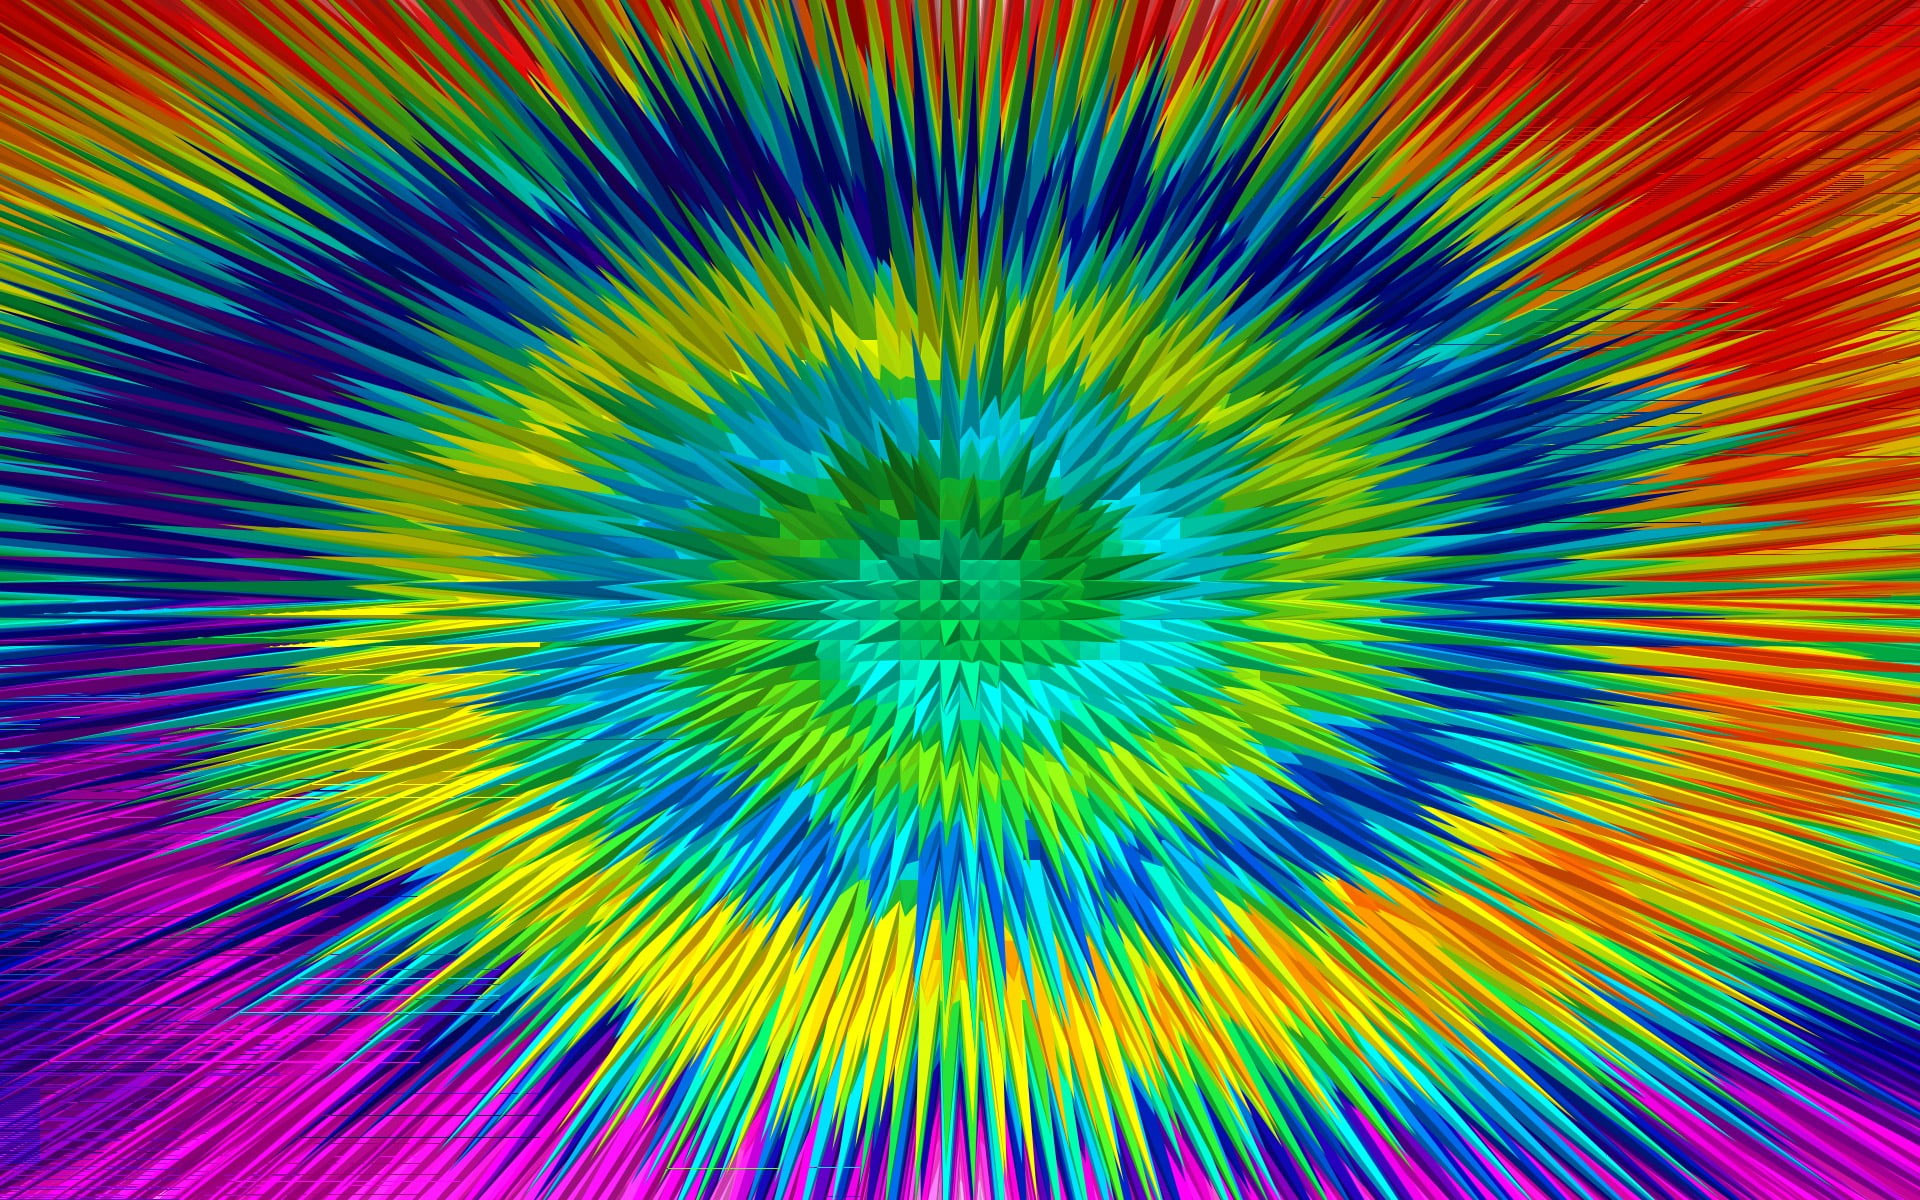 Wallpaper Blue, Yellow, And Red Tie Dye Shirt, Abstract